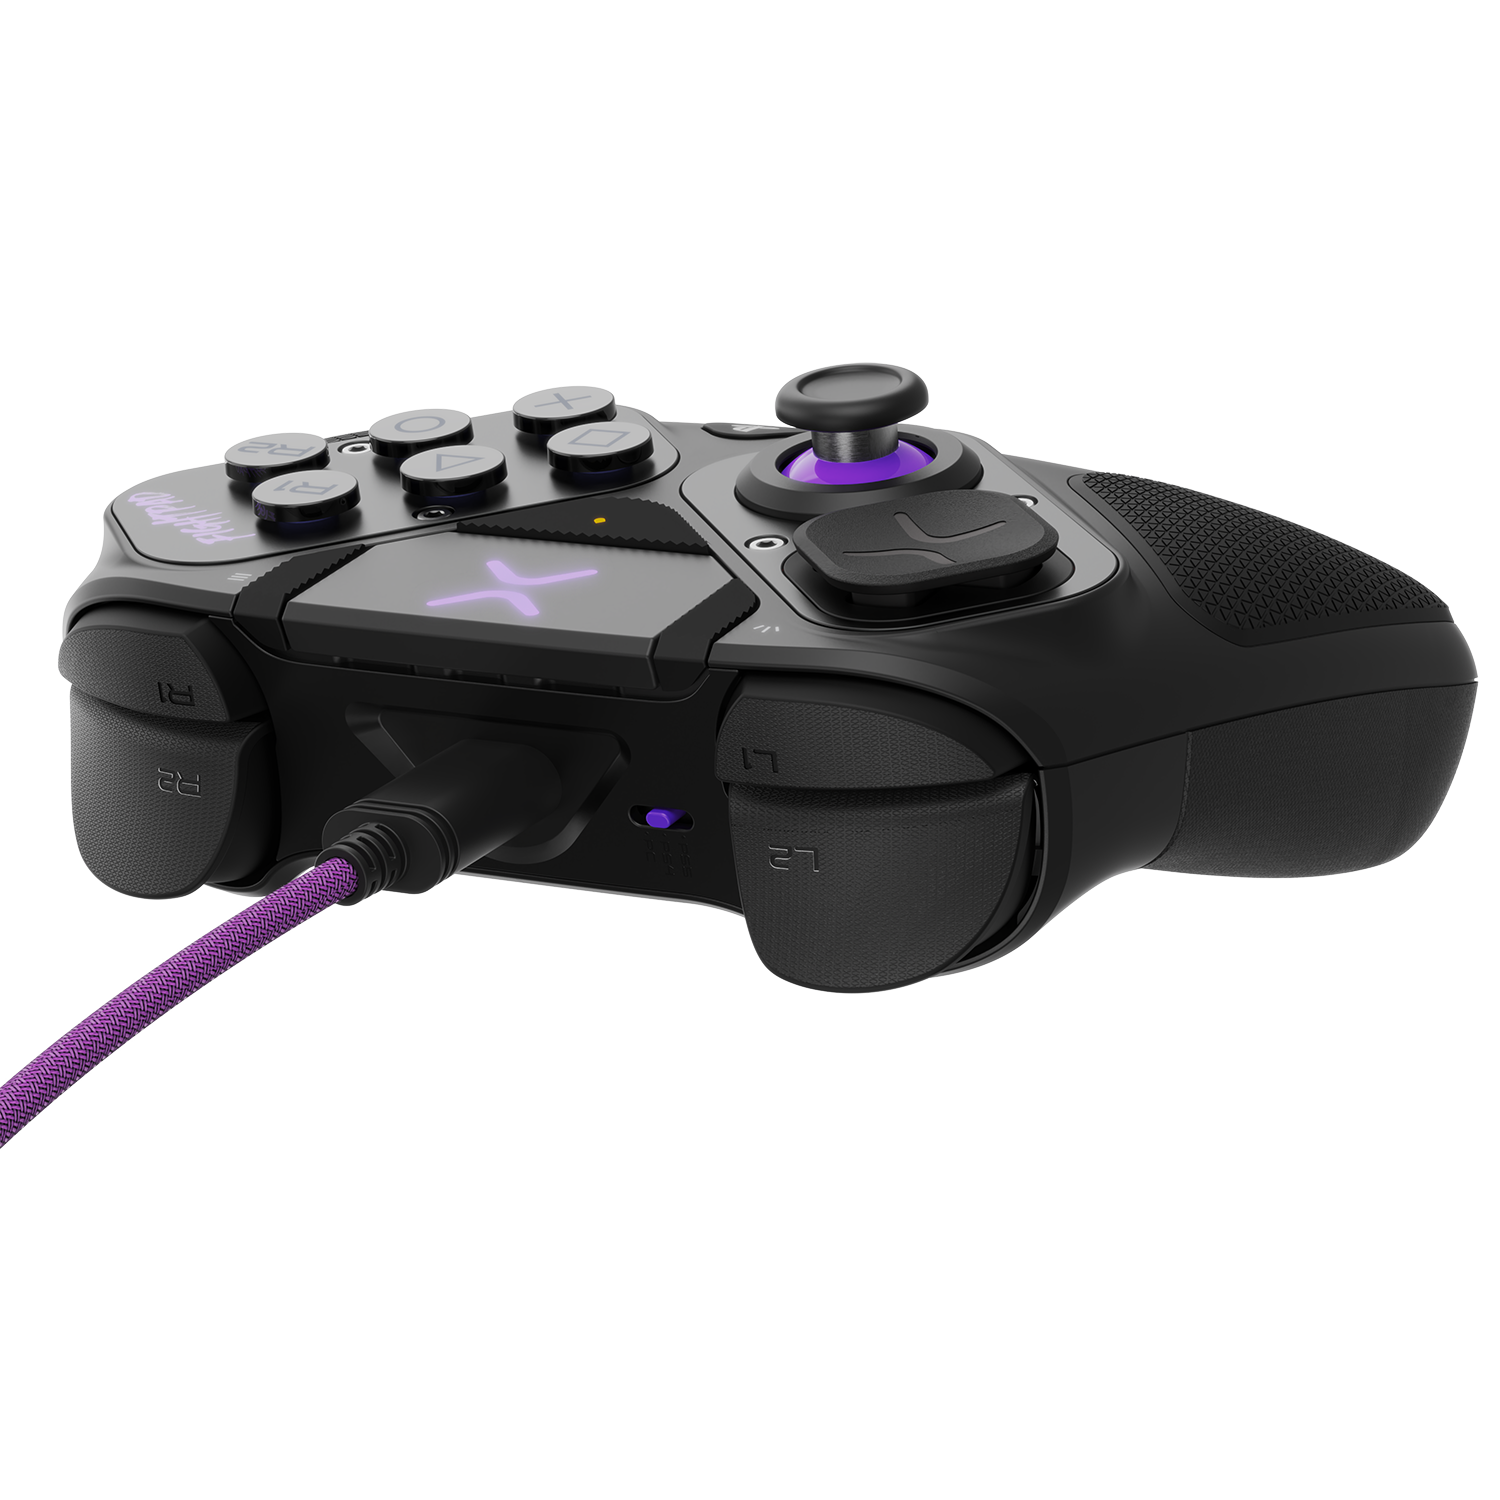 Controle playstation 4 pro player